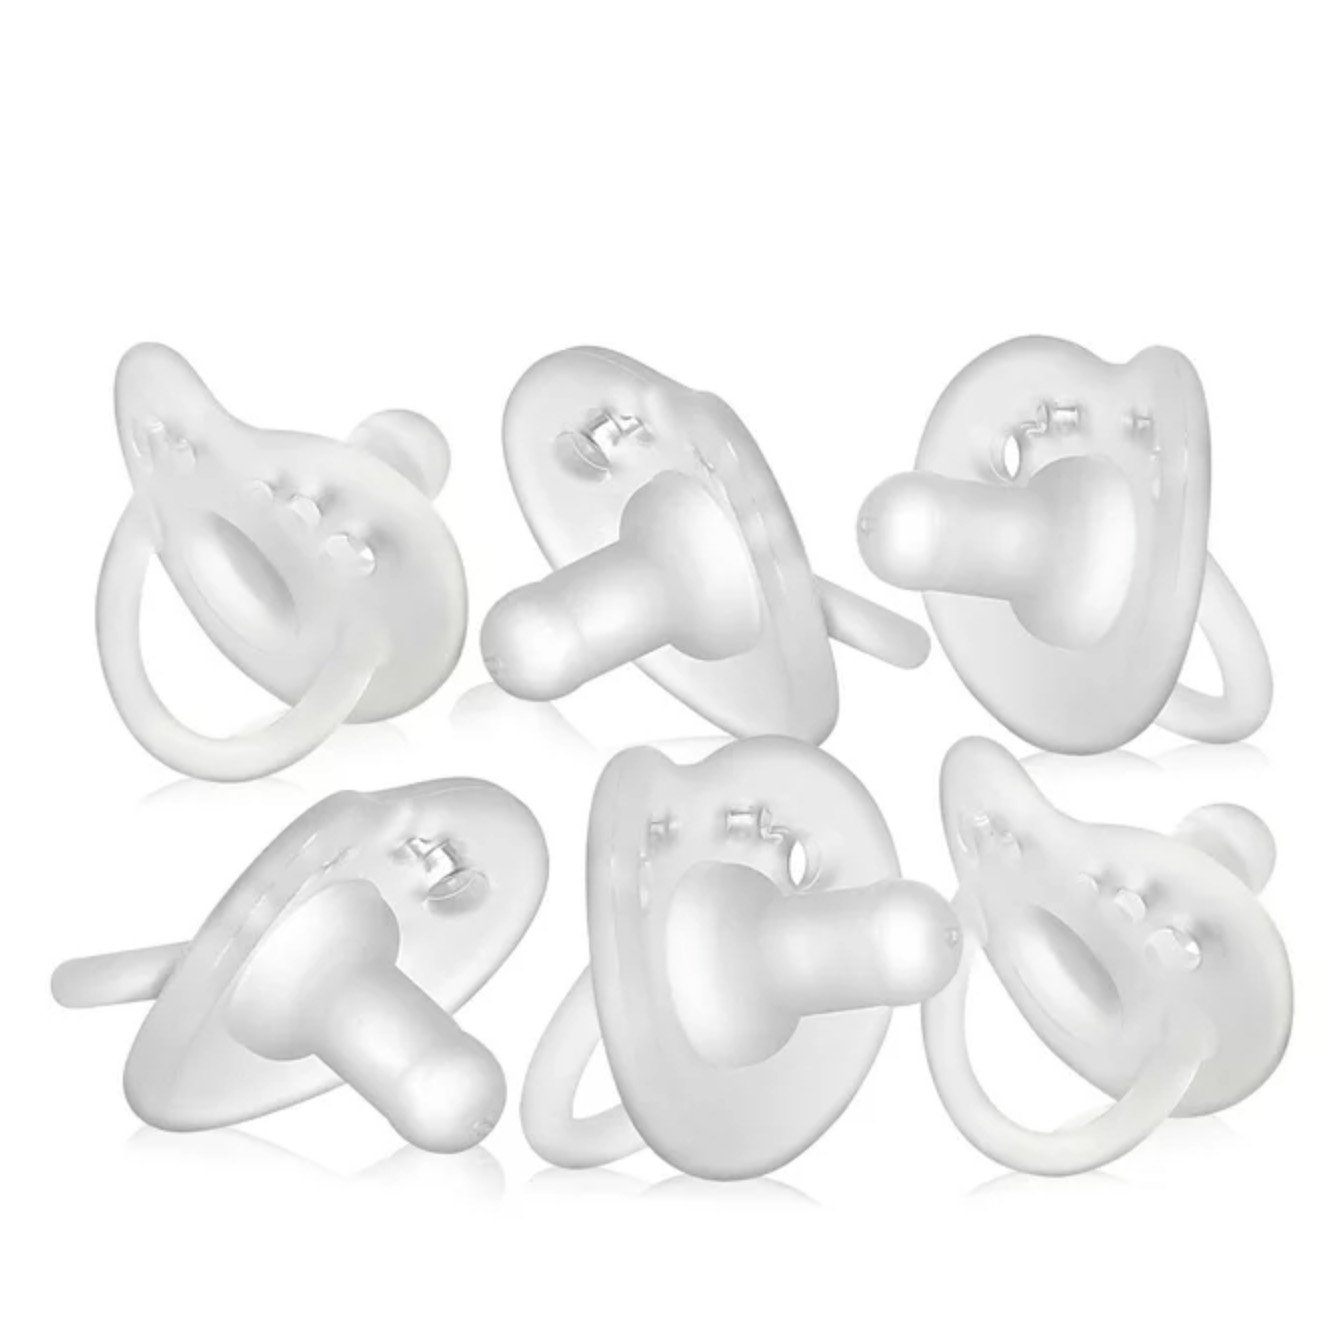 Six transparent silicone pacifiers